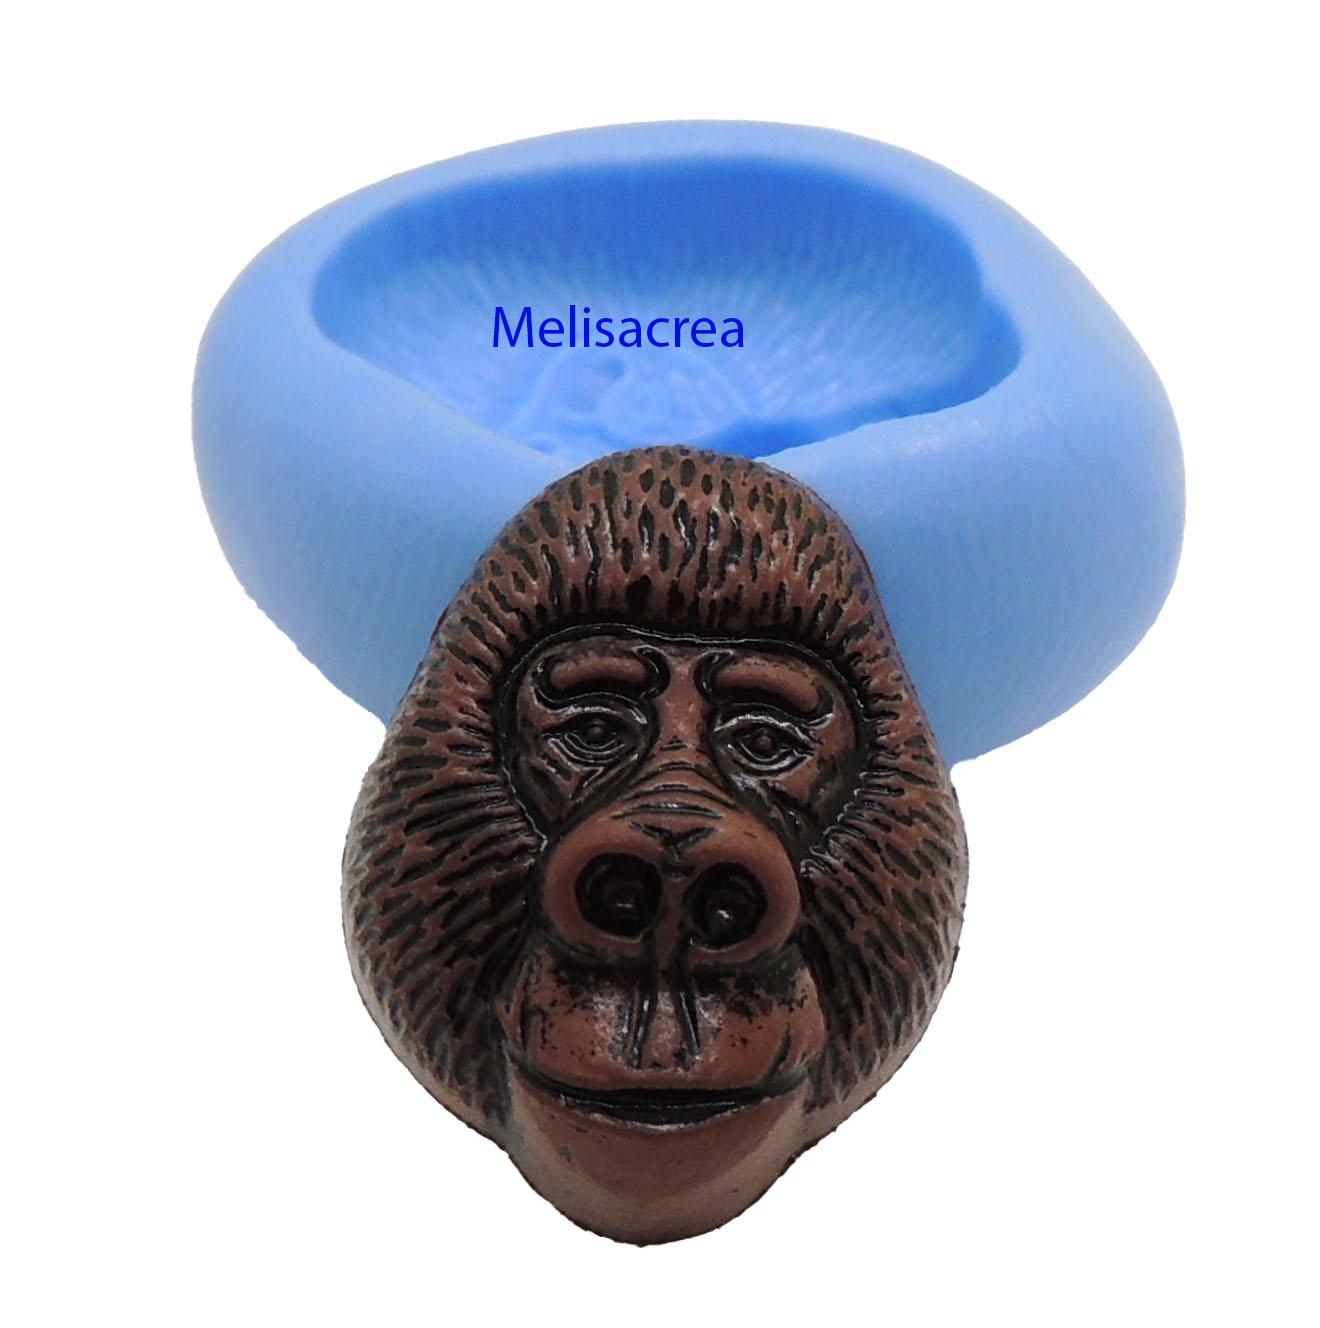 Lot 6 Moules Silicone animaux Sauvage, savane